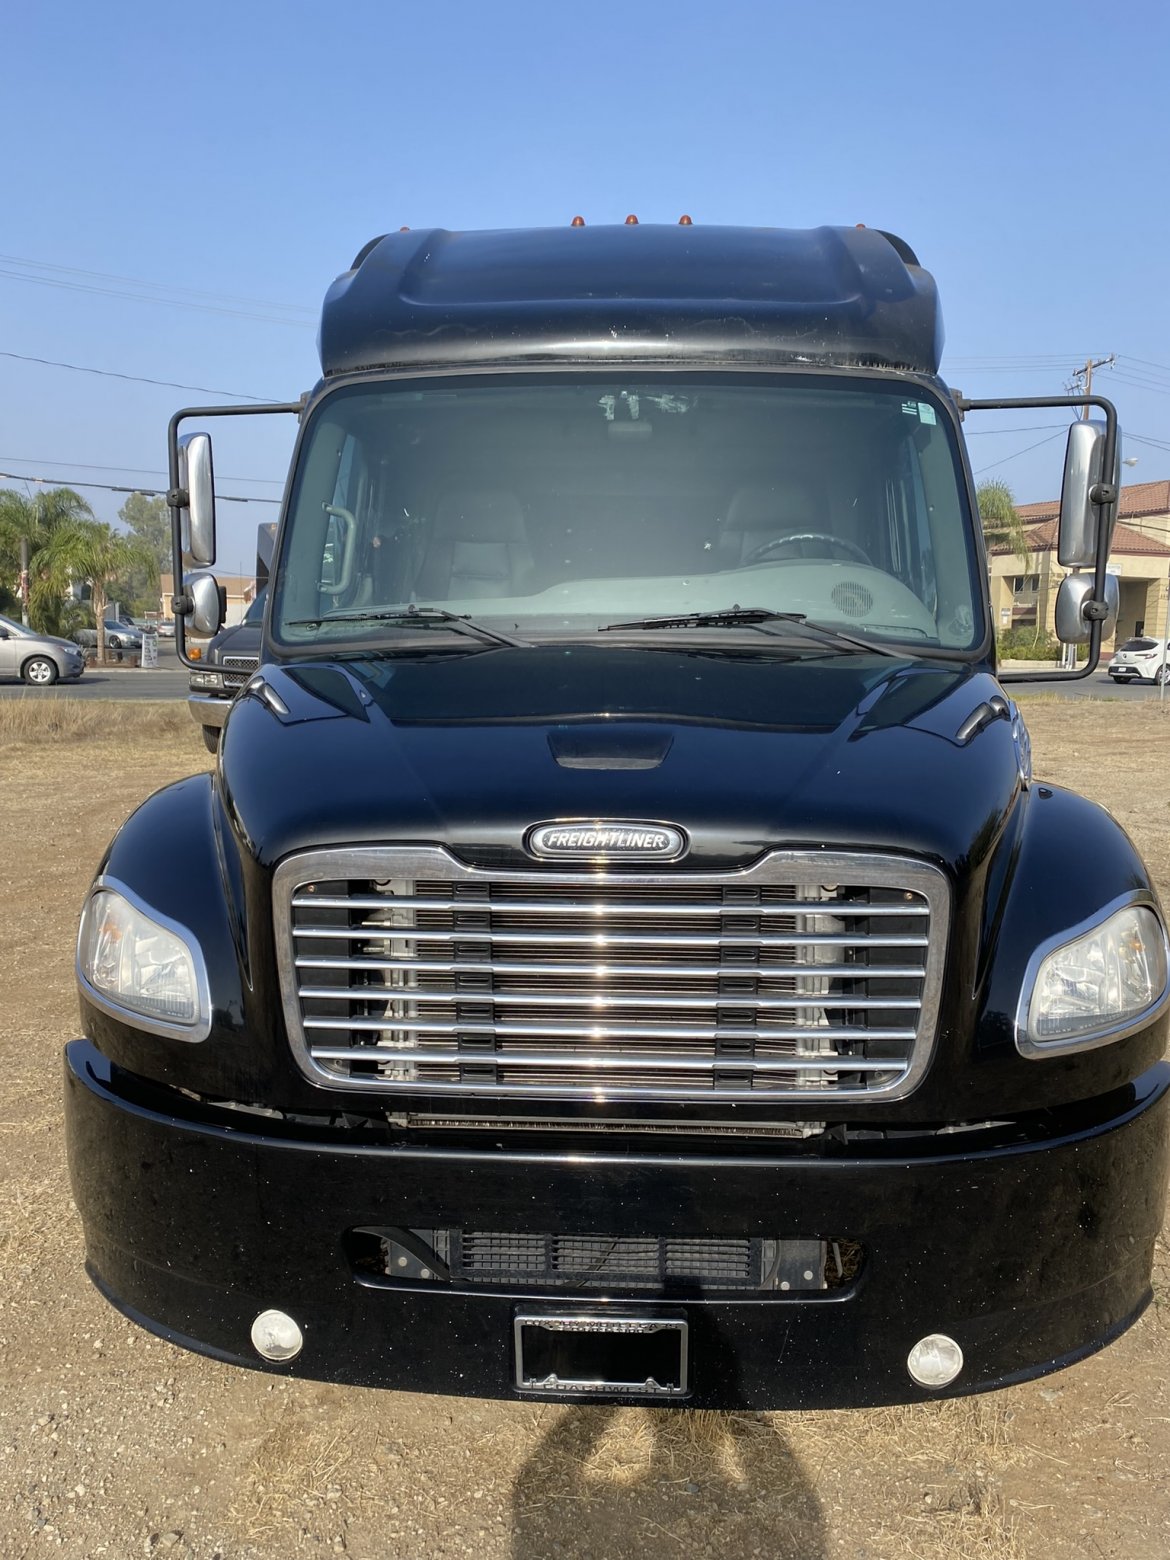 Executive Shuttle for sale: 2017 Freightliner M2 by Executive Coachbuilders